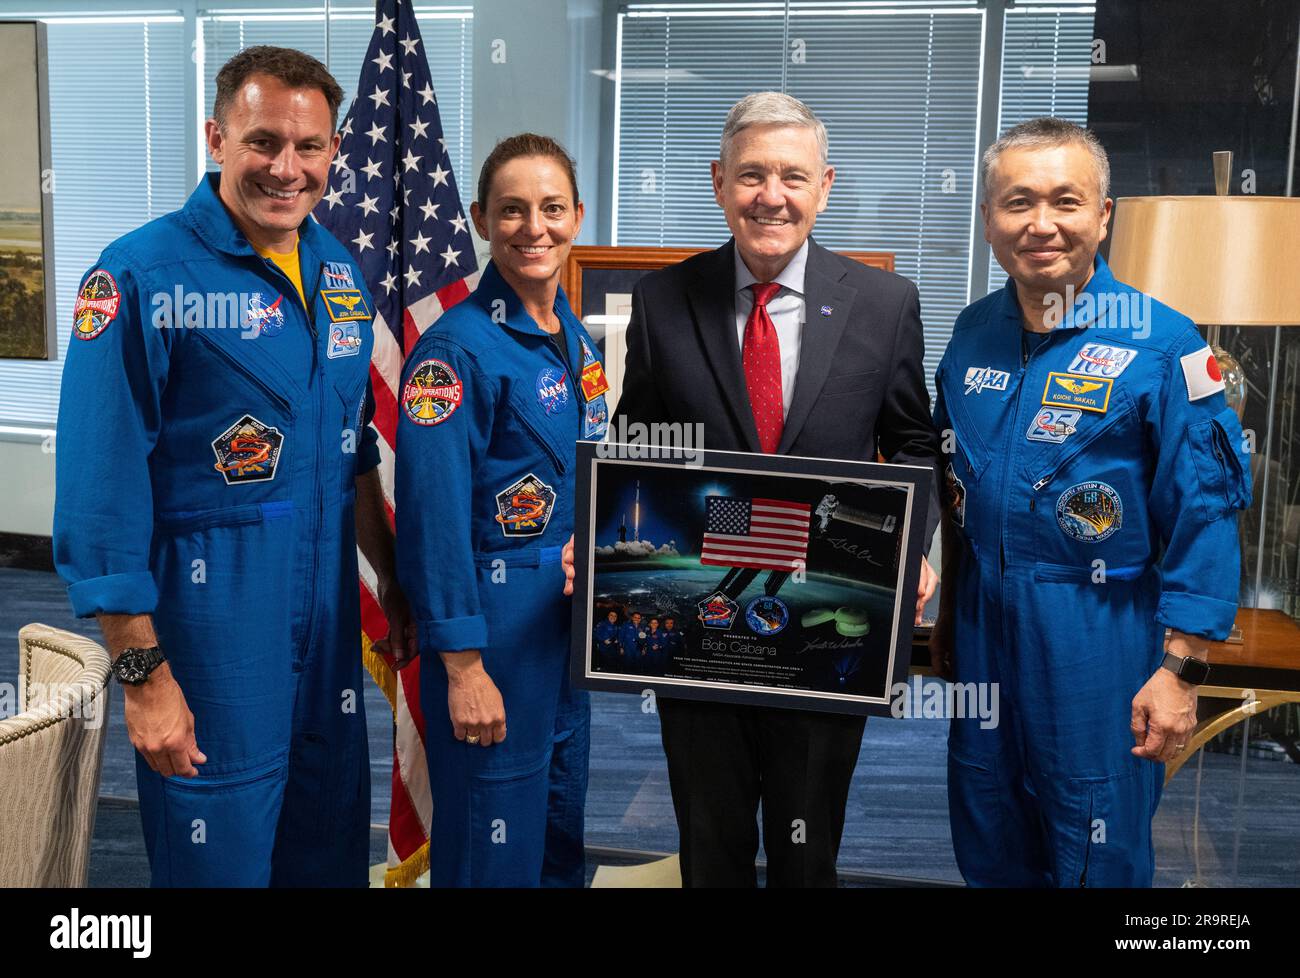 NASA’s SpaceX Crew-5 Astronauts with Agency Leadership. NASA’s SpaceX Crew-5 astronauts Josh Cassada, left, and Nicole Mann of NASA, second from left, of NASA and Japan Aerospace Exploration Agency (JAXA) astronaut Koichi Wakata, right, pose for a picture with NASA Associate Administrator Bob Cabana, second from right, after being presented with a montage from their flight, Monday, June 5, 2023 at the Mary W. Jackson NASA Headquarters building in Washington. Mann, Cassada, and Wakata spent 157 days in space as part of Expedition 68 aboard the International Space Station. Stock Photo